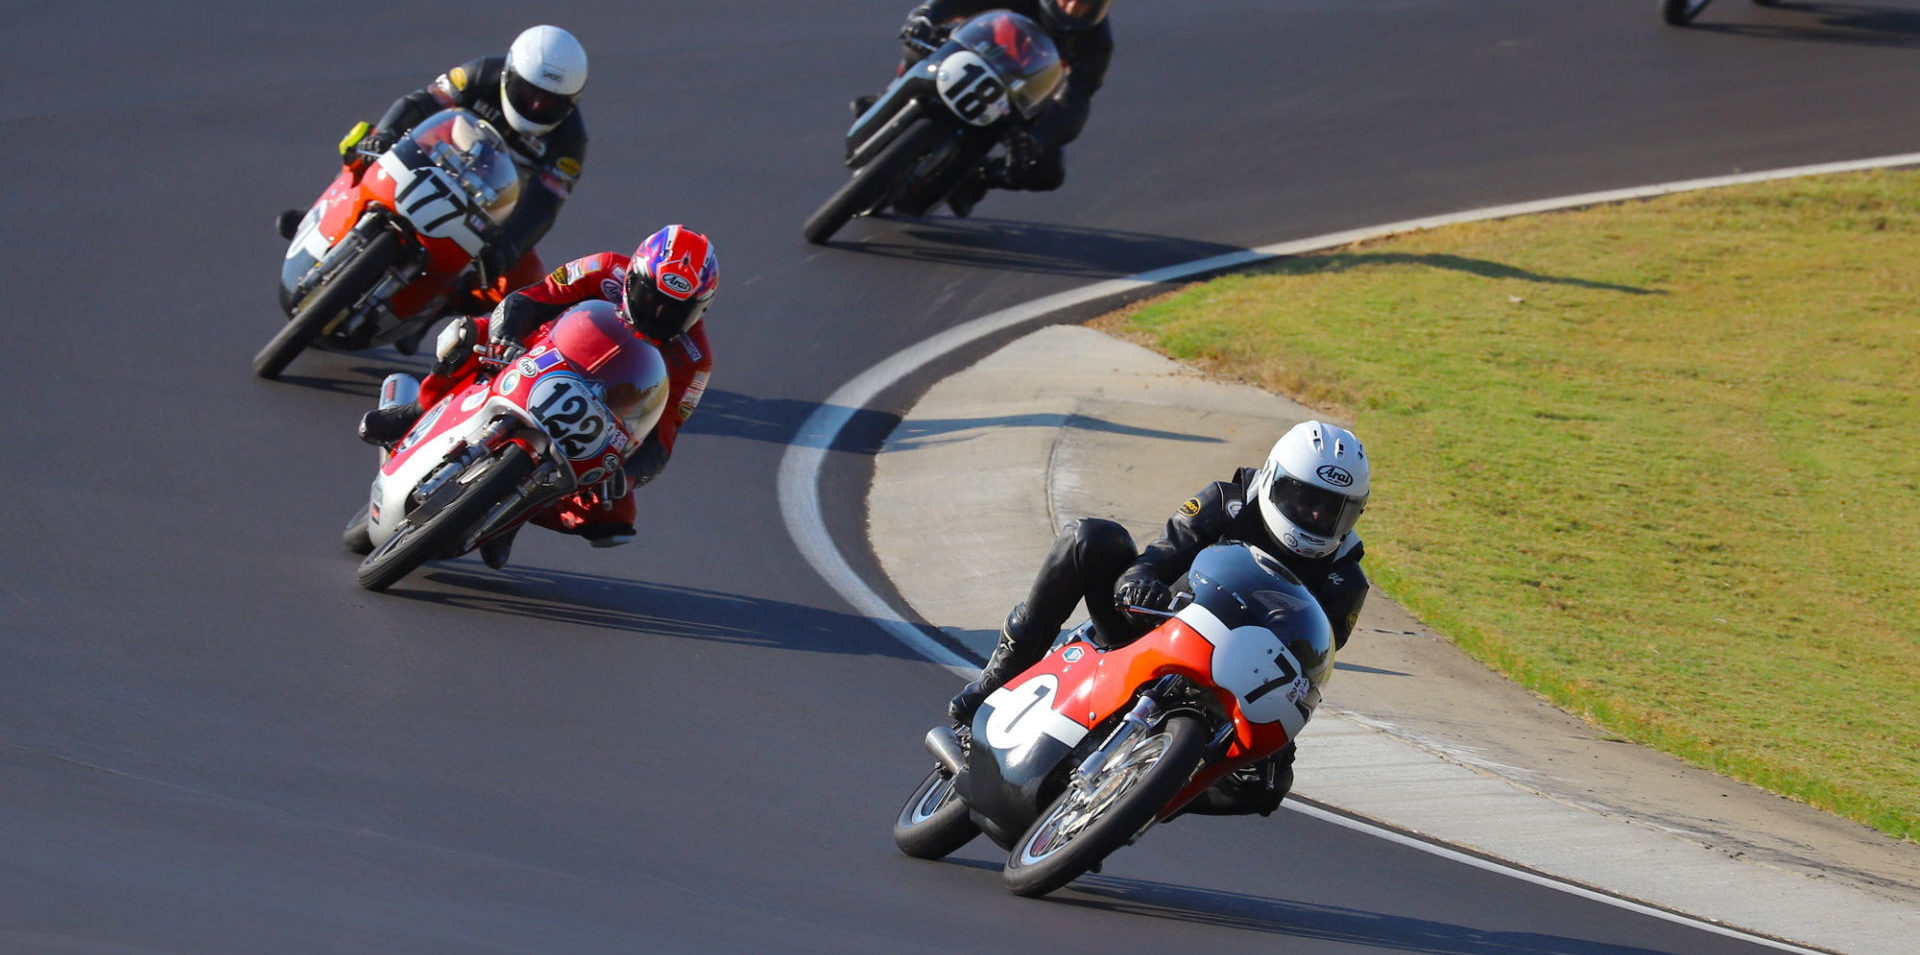 Dave Roper (7) leads Alex McLean (122), Walt Fulton (177X), and Jack Parker (18) early in the AHRMA Vintage Cup (350 GP) race on October 5 at Barber Motorsports Park. Photo by etechphoto.com, courtesy of AHRMA.